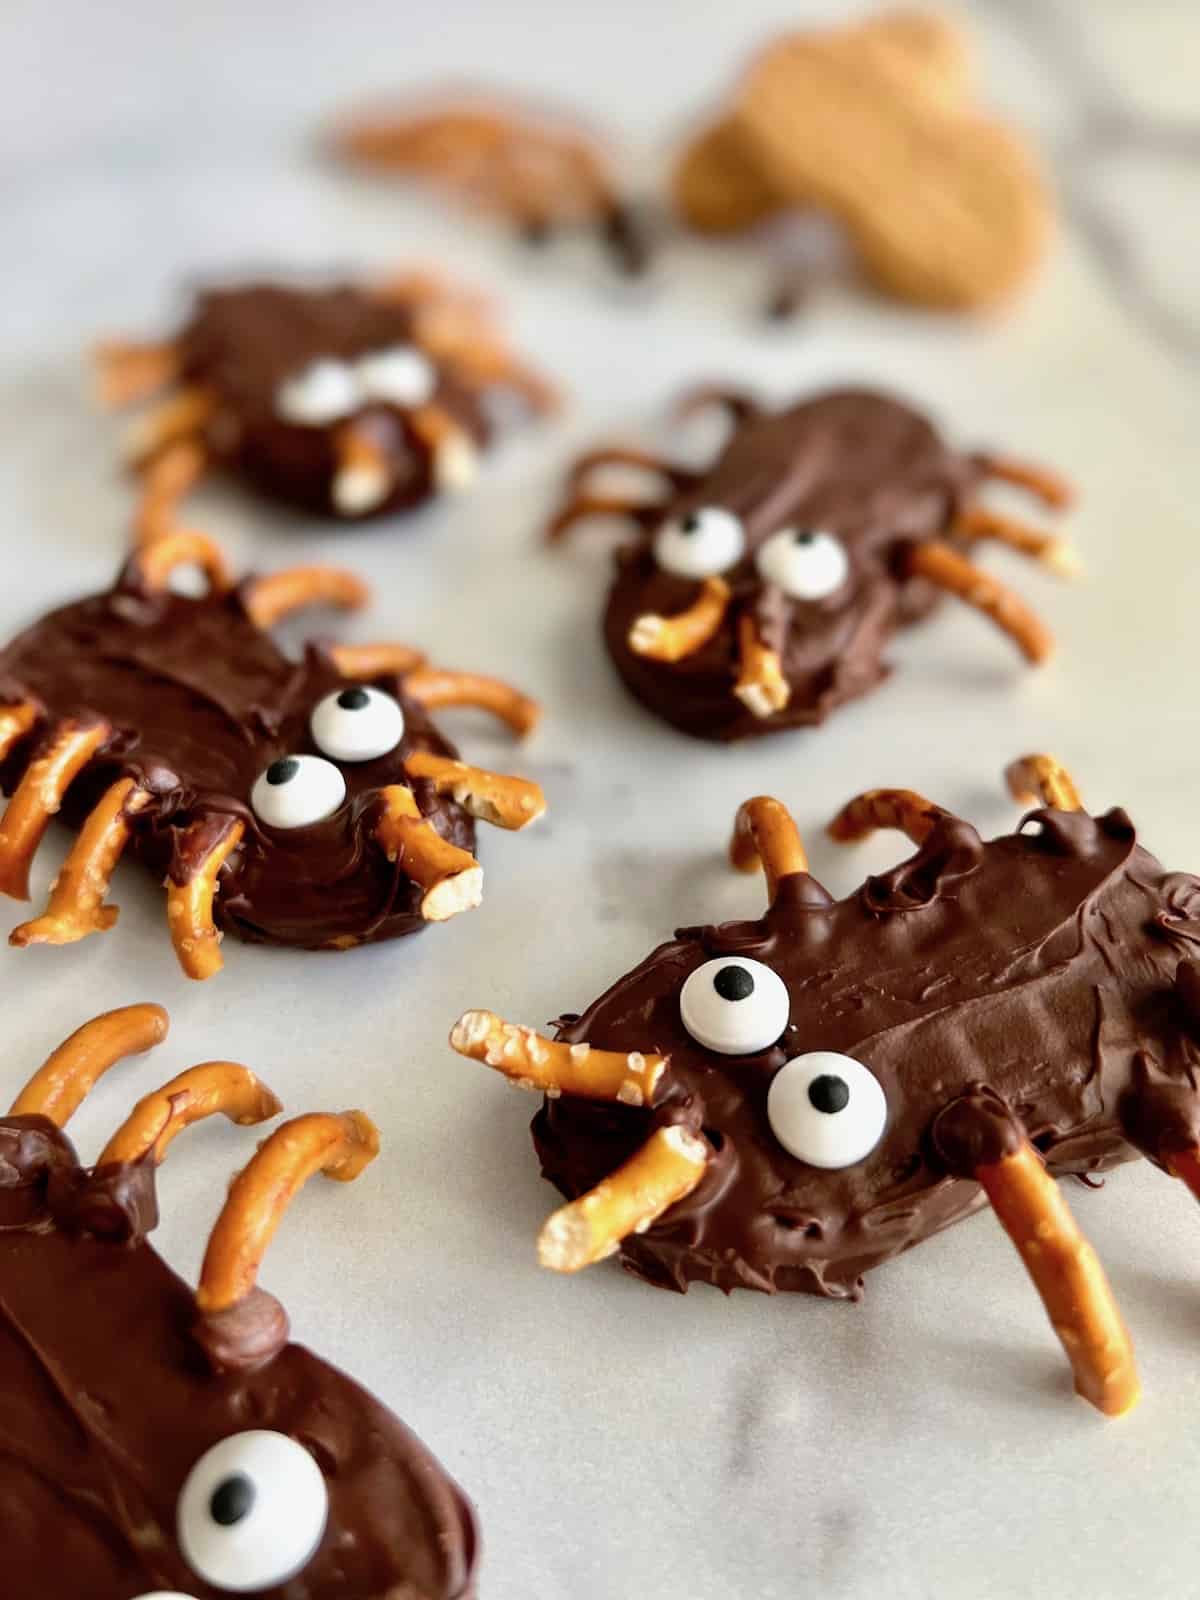 Bug & Spider Peanut Butter Chocolate Cookies look like they are crawling on the counter.